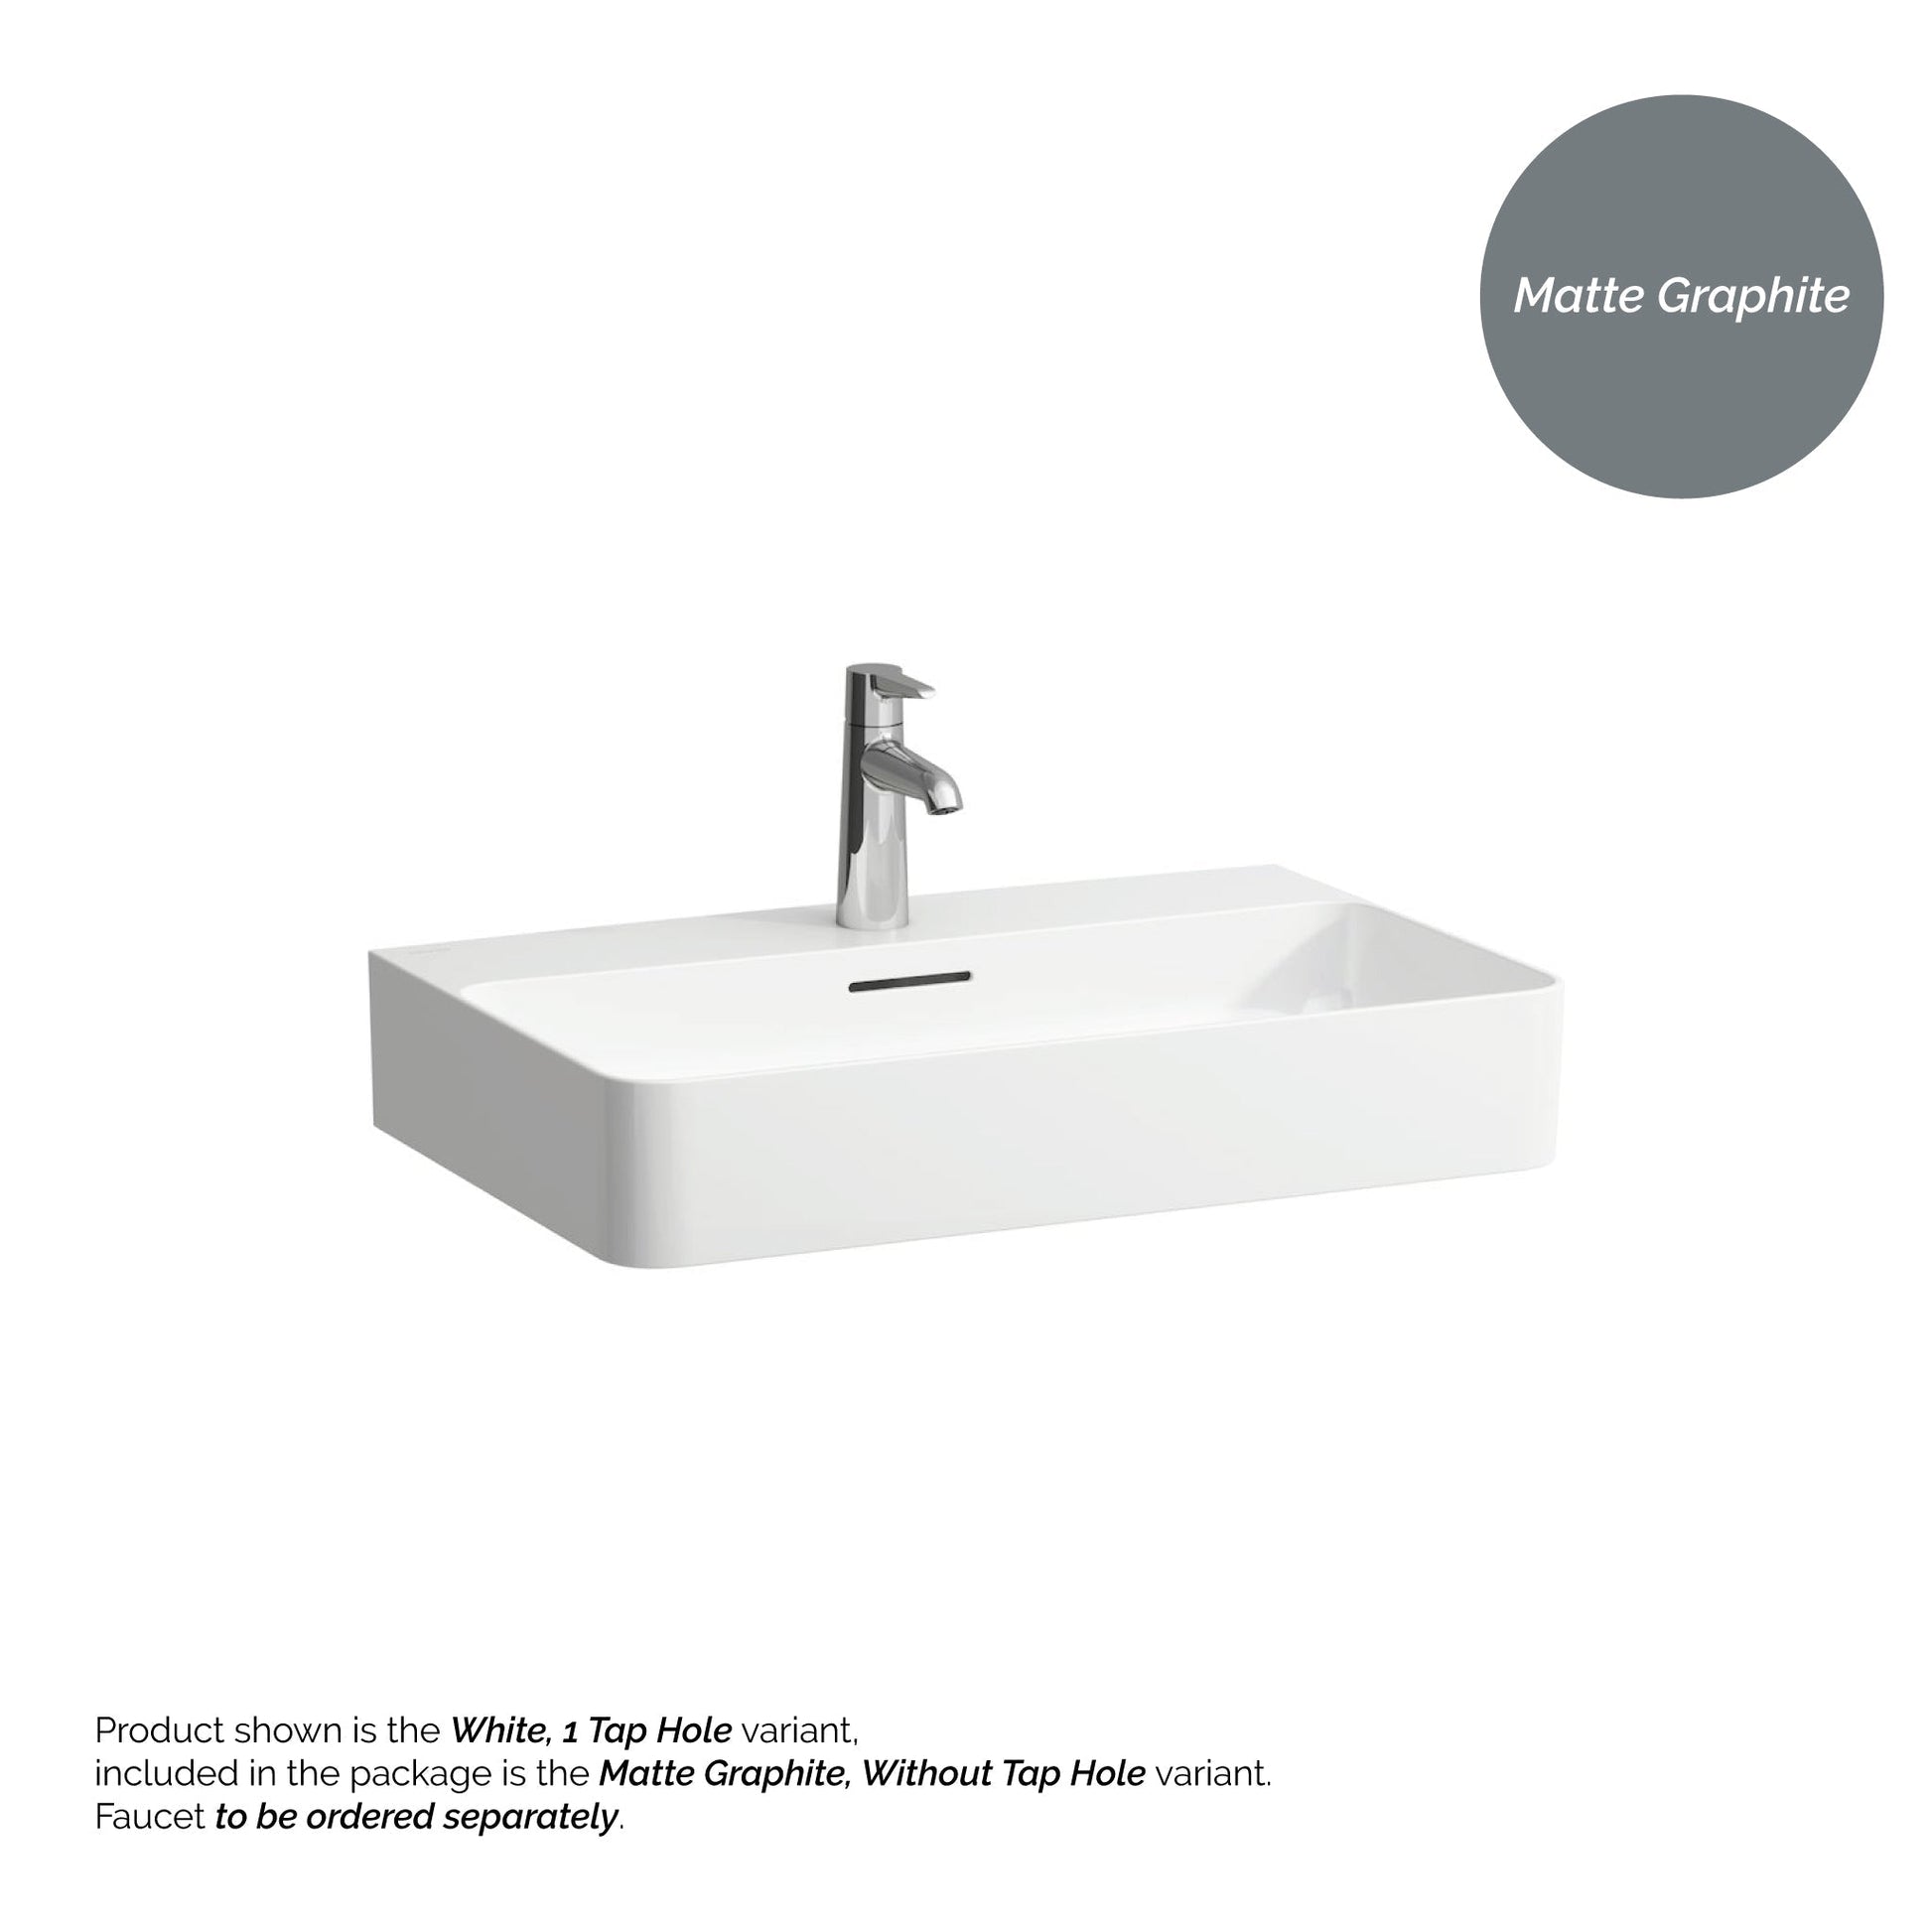 Laufen Val 26" x 17" Matte Graphite Ceramic Wall-Mounted Bathroom Sink Without Faucet Hole